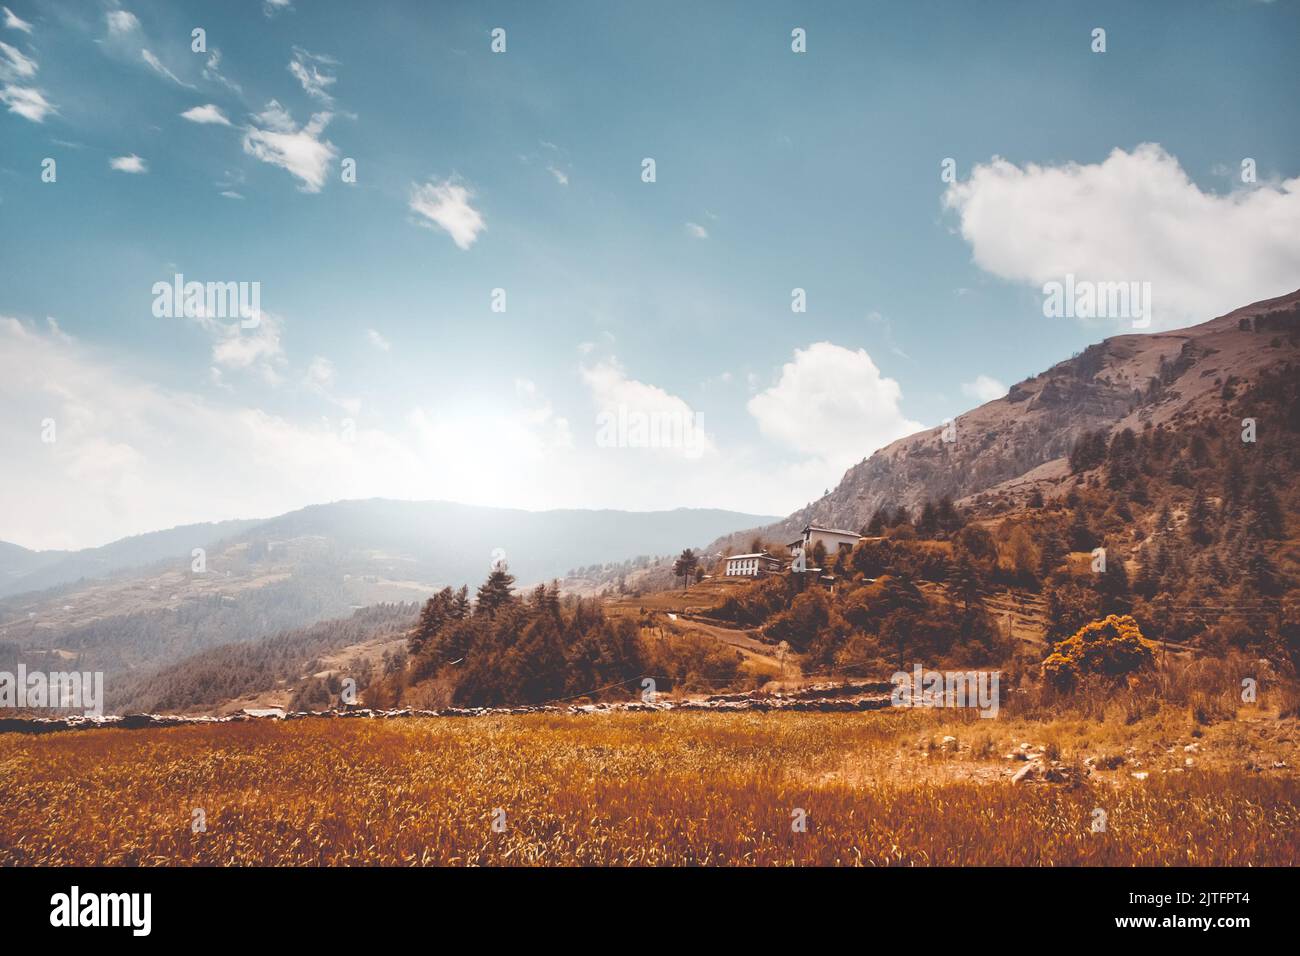 Autumn mountain valley against blue cloudy sky. Bright orange grass and mountain range in Nepal Himalayas. Amazing natural summer scenery. Stunning wild nature. Creative image for design Stock Photo